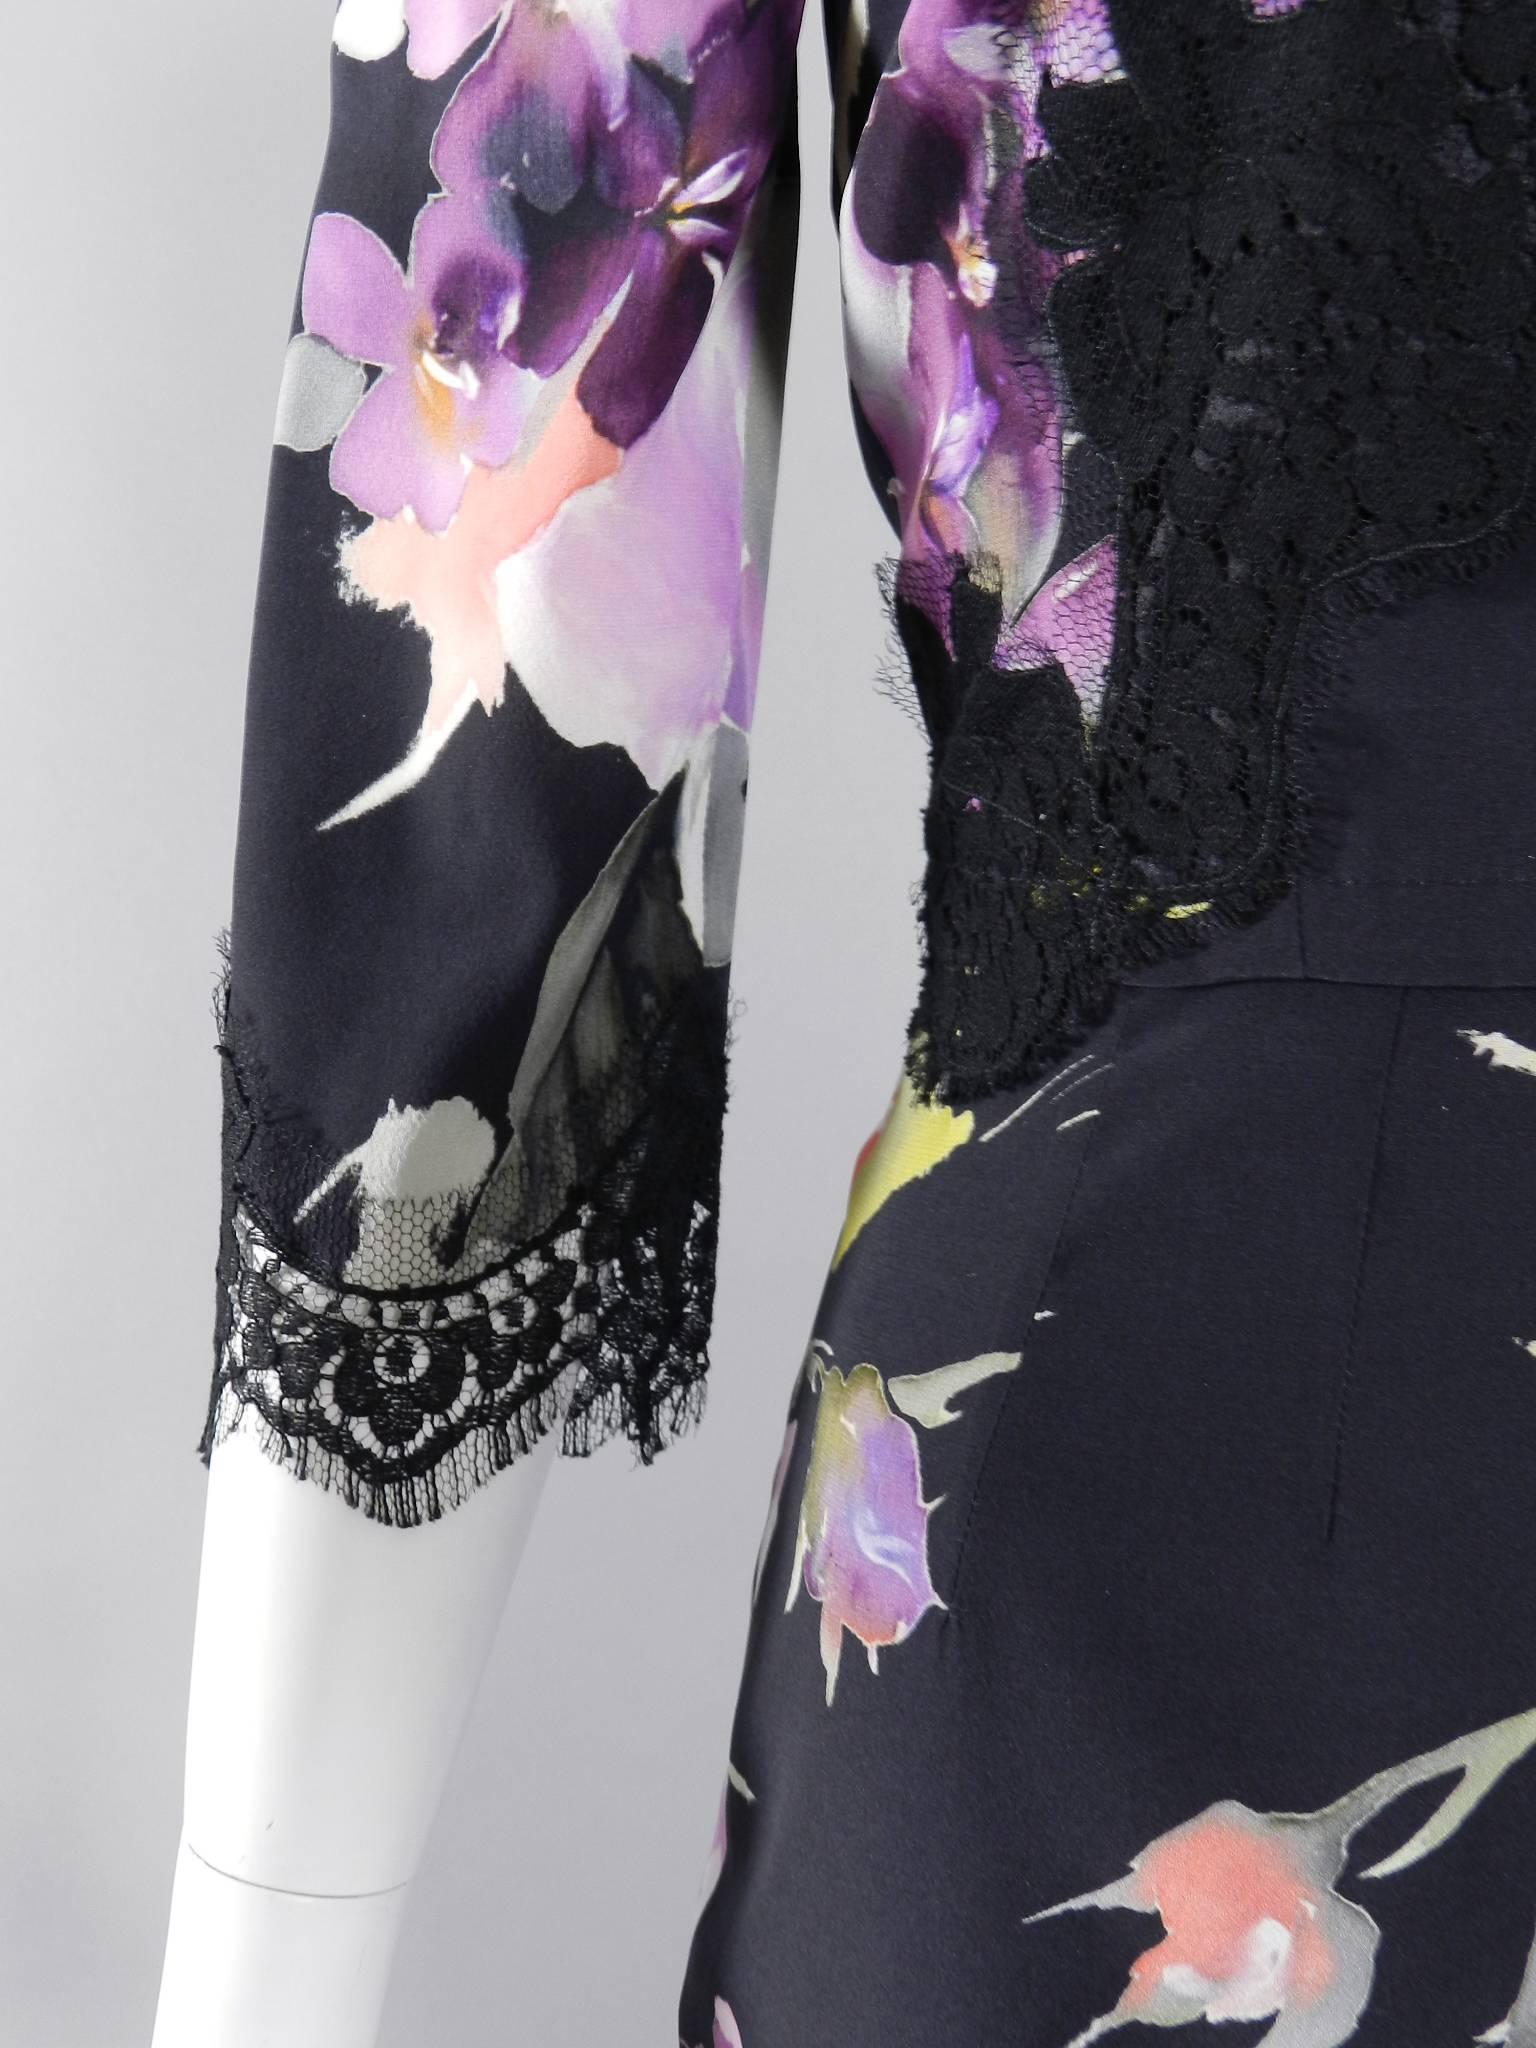 Dolce and Gabbana purple and red roses silk wiggle dress with black lace detail.  New with tags.  Centre back zipper, 3/4 length bracelet sleeve, lined. Tagged size IT 42 (USA 6).  Tof ti 34/35" at bust, 28-29" at waist and 38" hip.